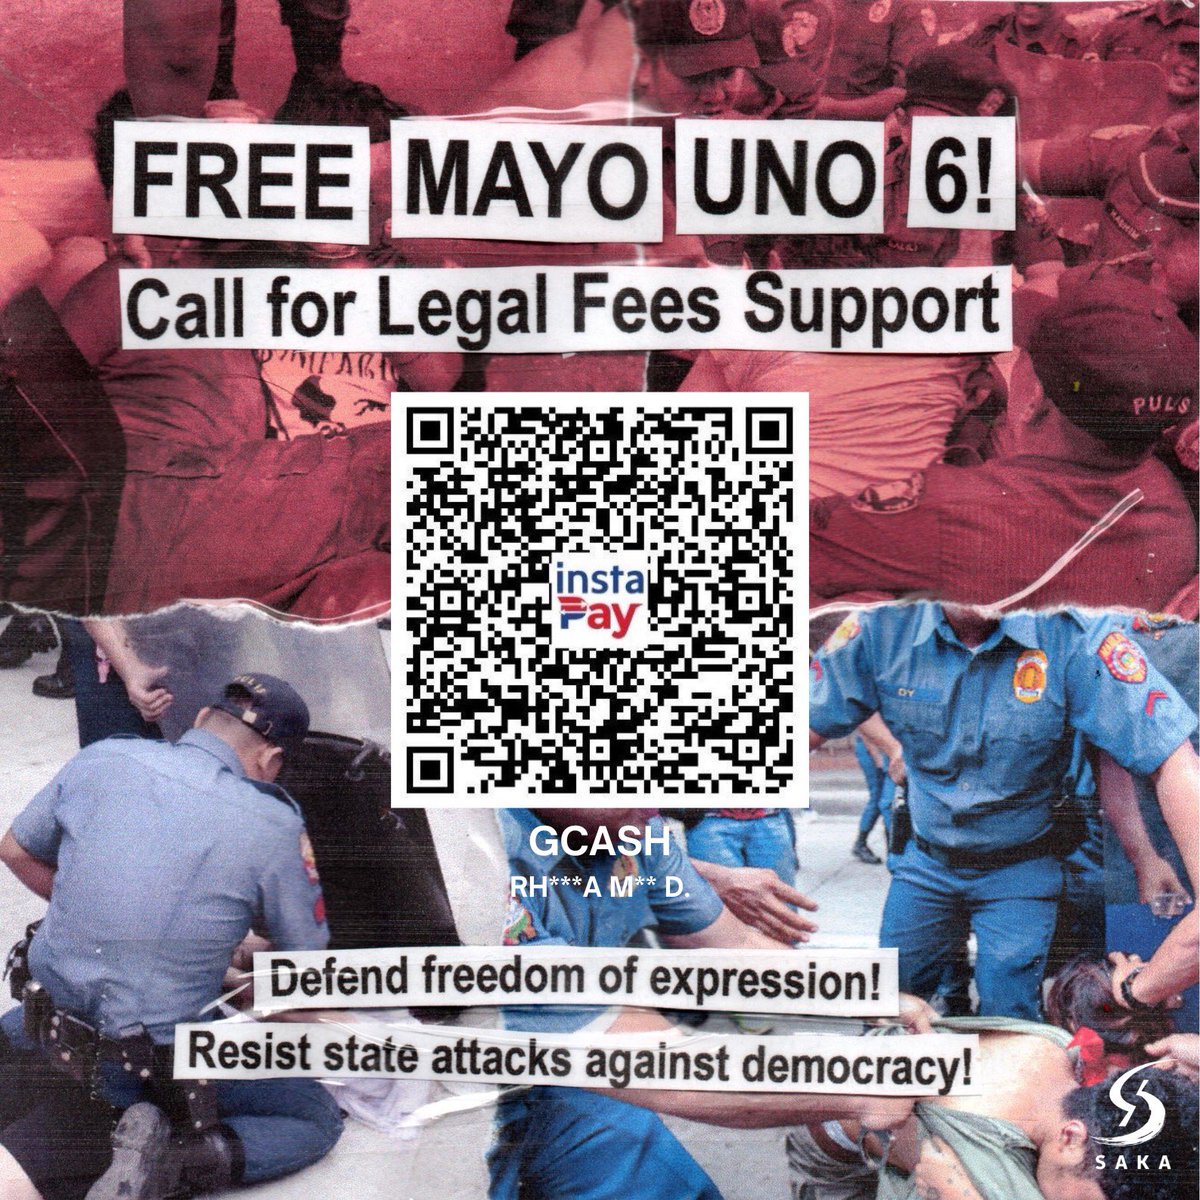 Free Mayo Uno 6 Now! Drop all charges against Mayo Uno 6! To send donations for Mayo Uno 6’s legal fees, you may scan the Gcash QR code below. #FreeMayoUno6 #StopTheAttacks #HandsOffActivists